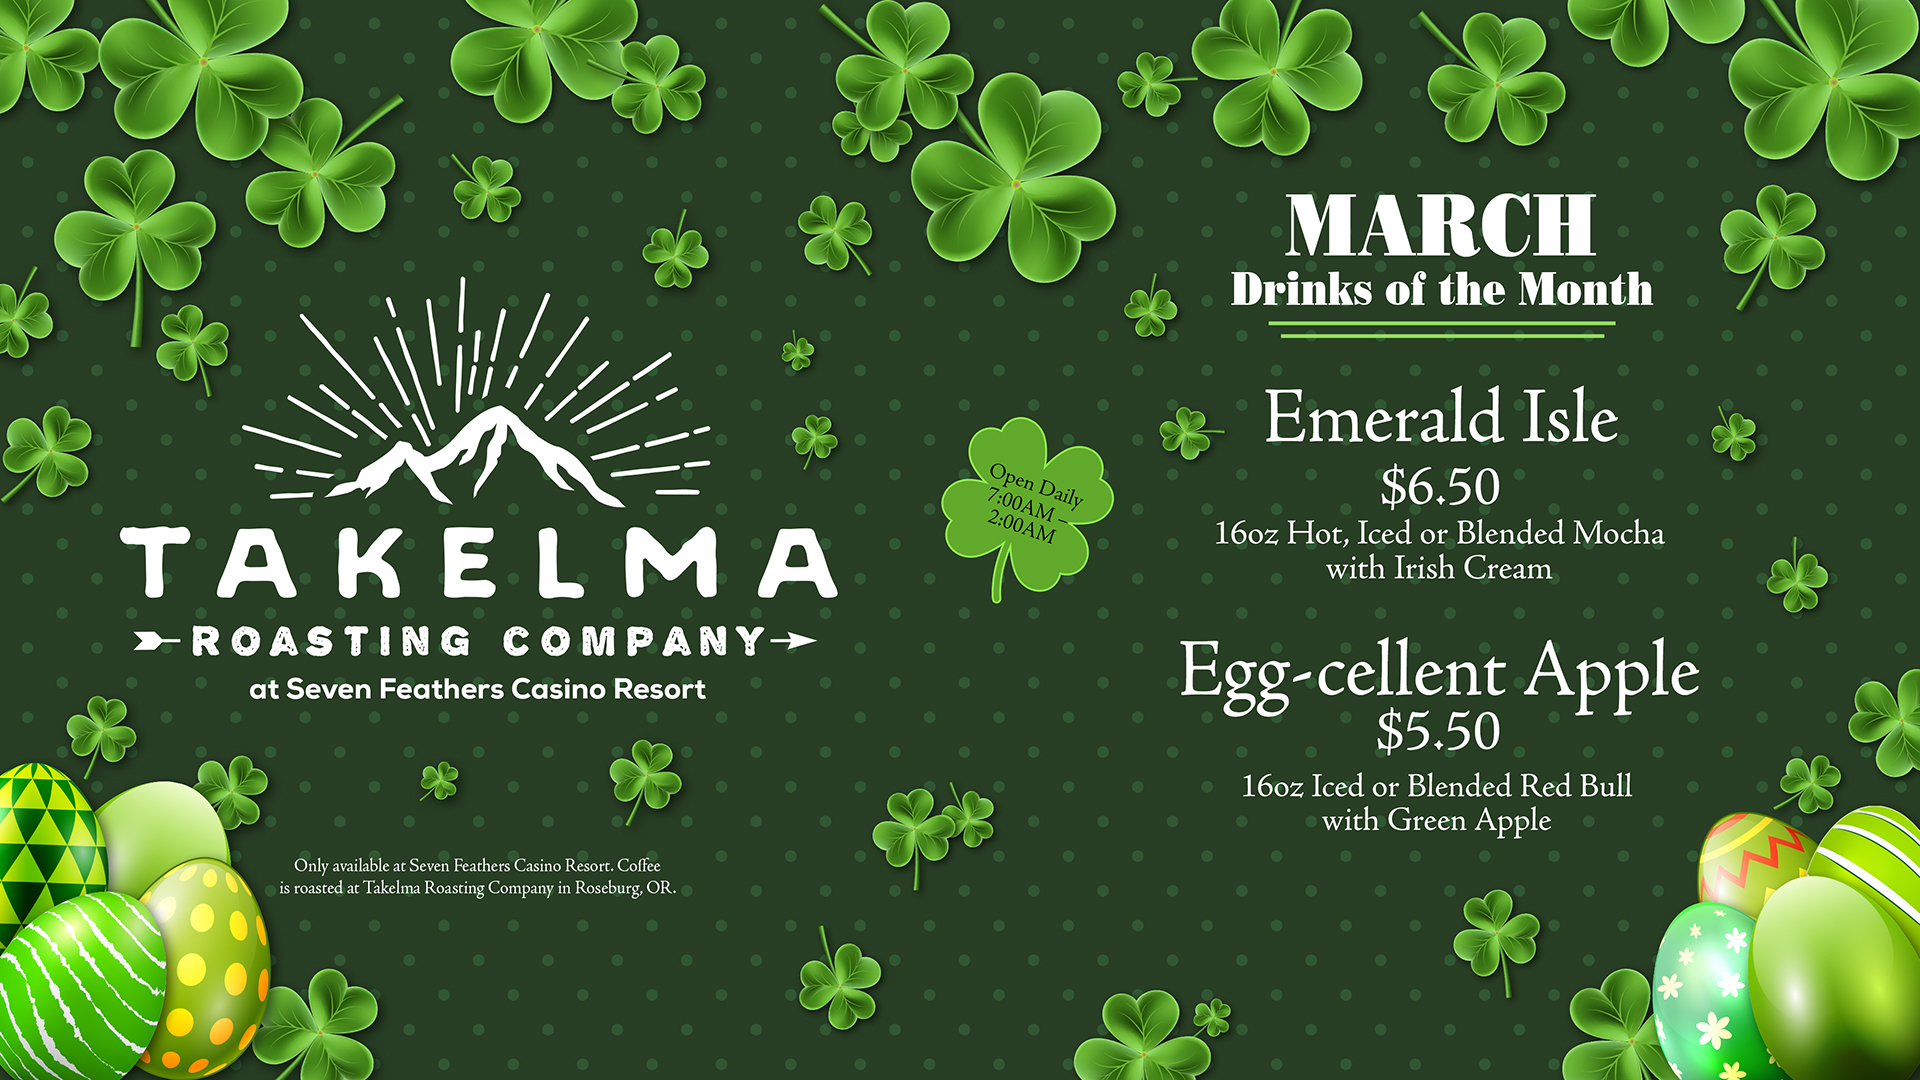 Enjoy The March Flavors Of The Month Inside Takelma Roasting Co. Inside Seven Feathers Casino Resort